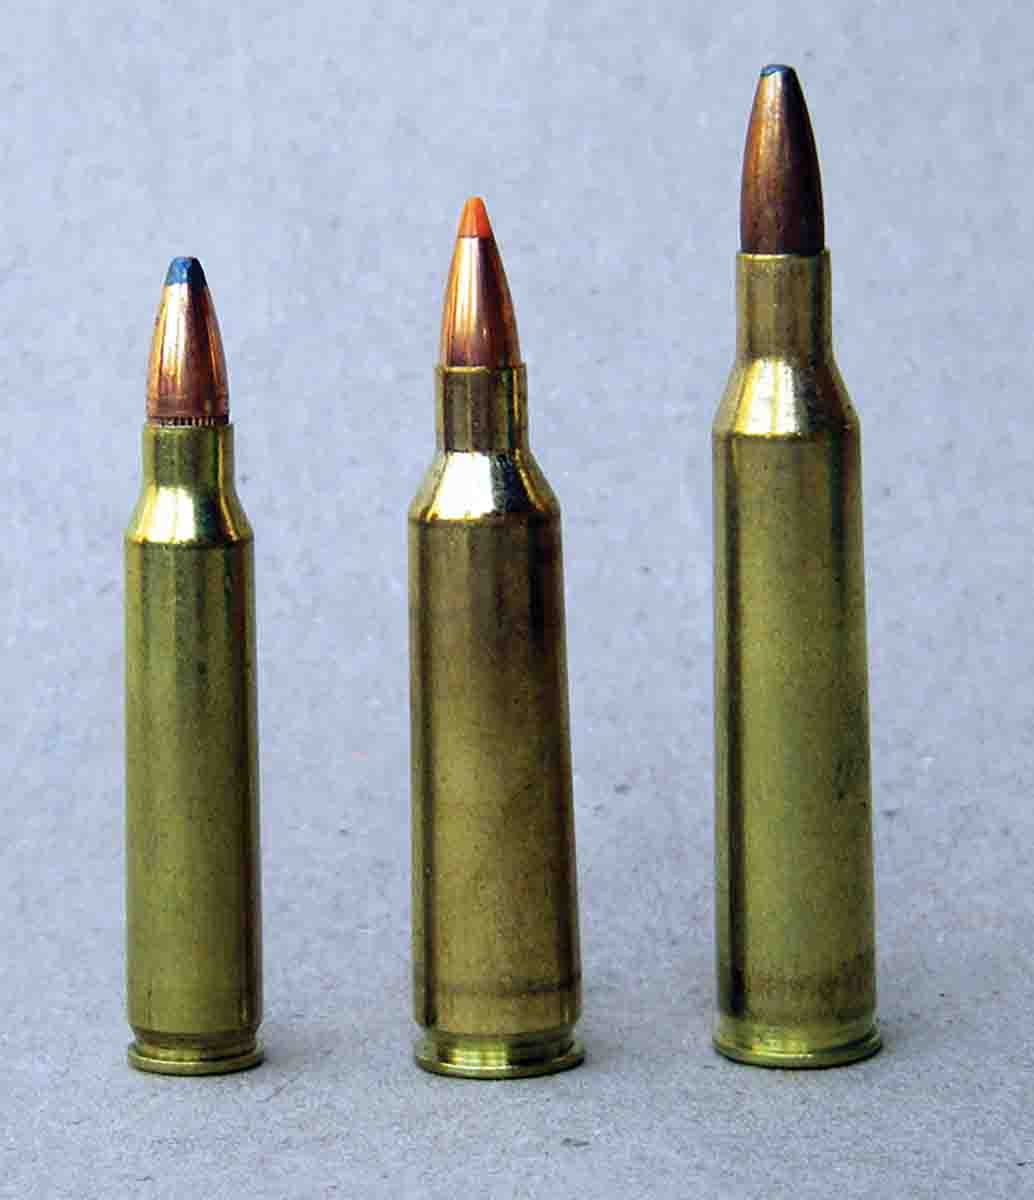 The (center) .22-250 Remington offers a significant ballistic advantage over the (left) .223 Remington and approaches the ballistics of the (right) .220 Swift.